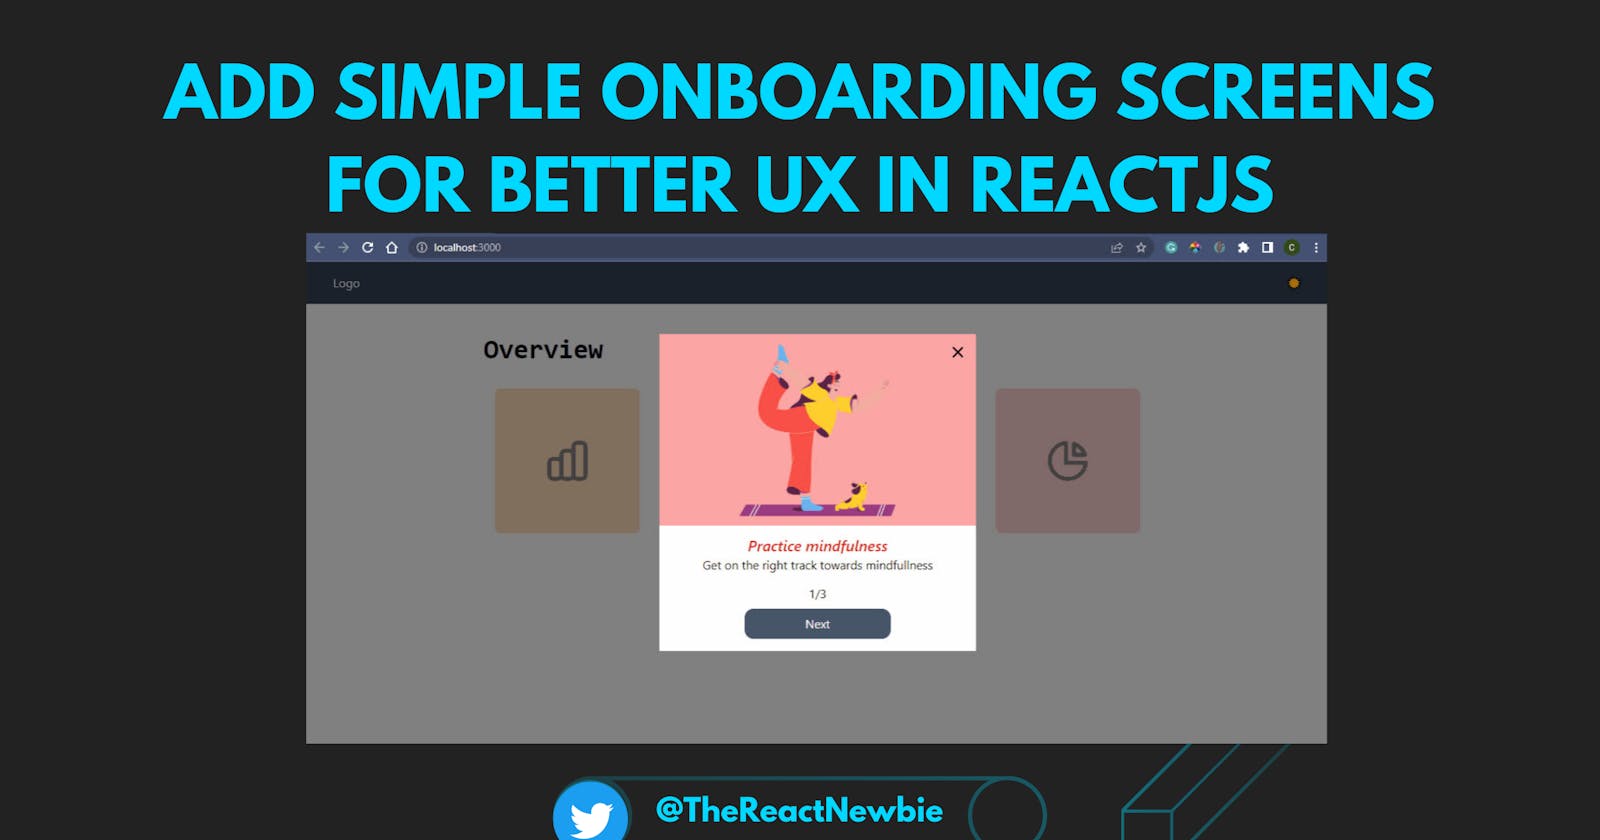 How to Add Simple Onboarding Screens for Better UX in ReactJS